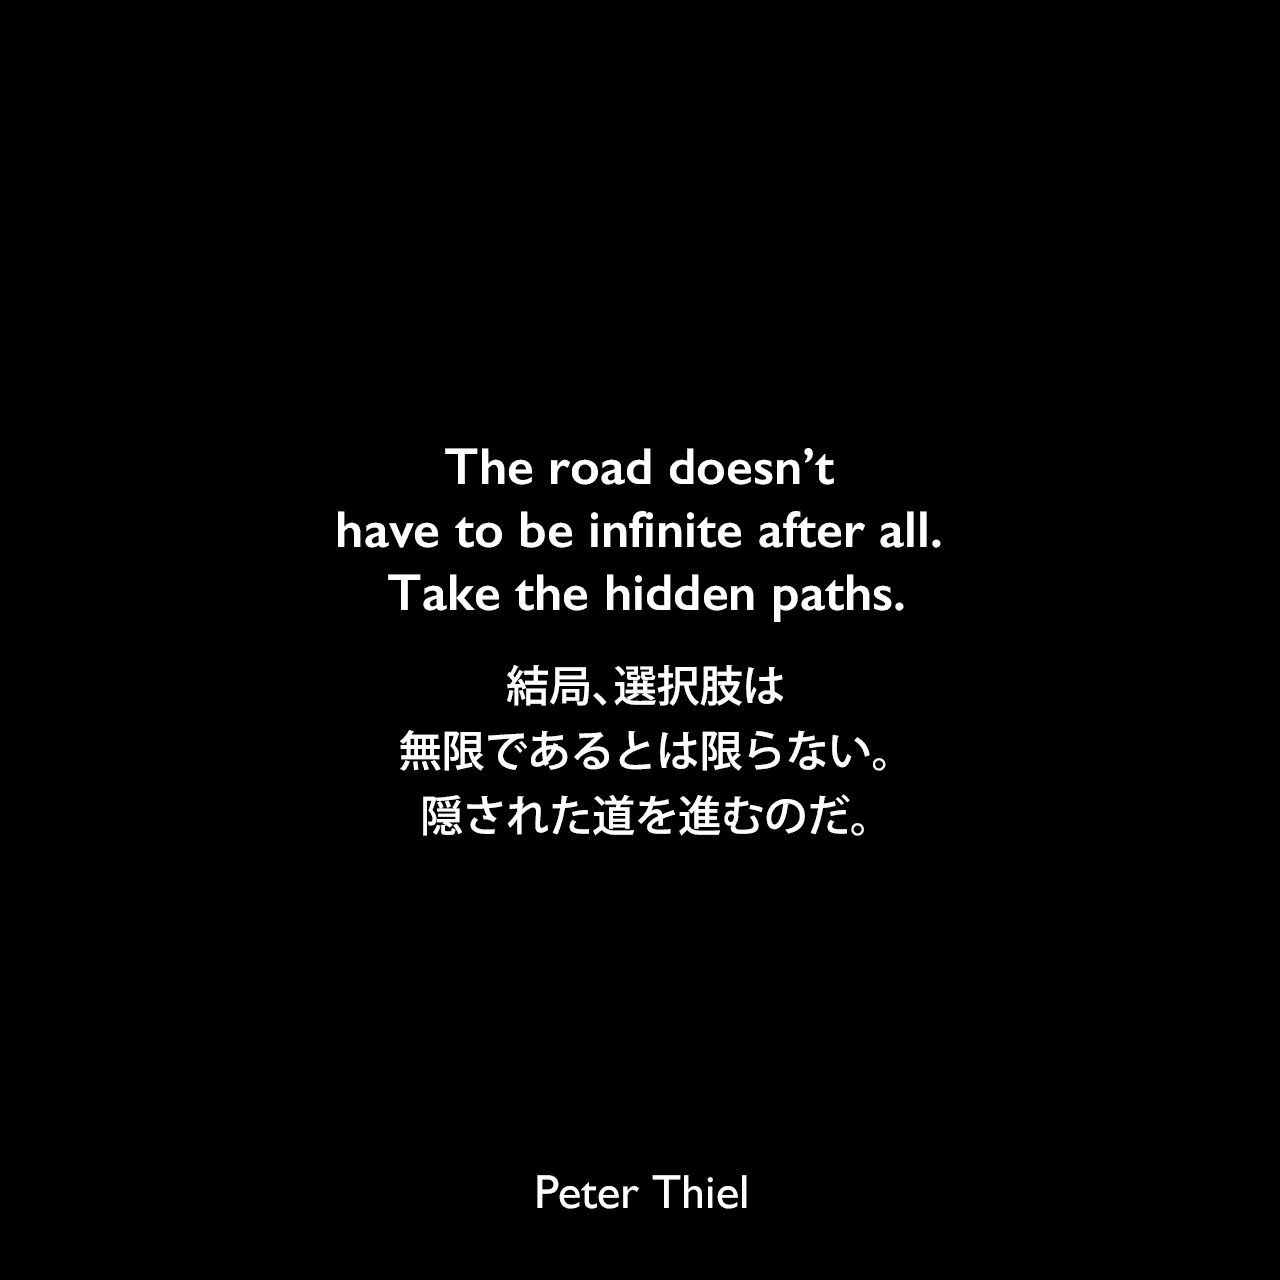 The road doesn’t have to be infinite after all. Take the hidden paths.結局、選択肢は無限であるとは限らない。隠された道を進むのだ。- ピーター・ティールの本「Zero to One」よりPeter Thiel